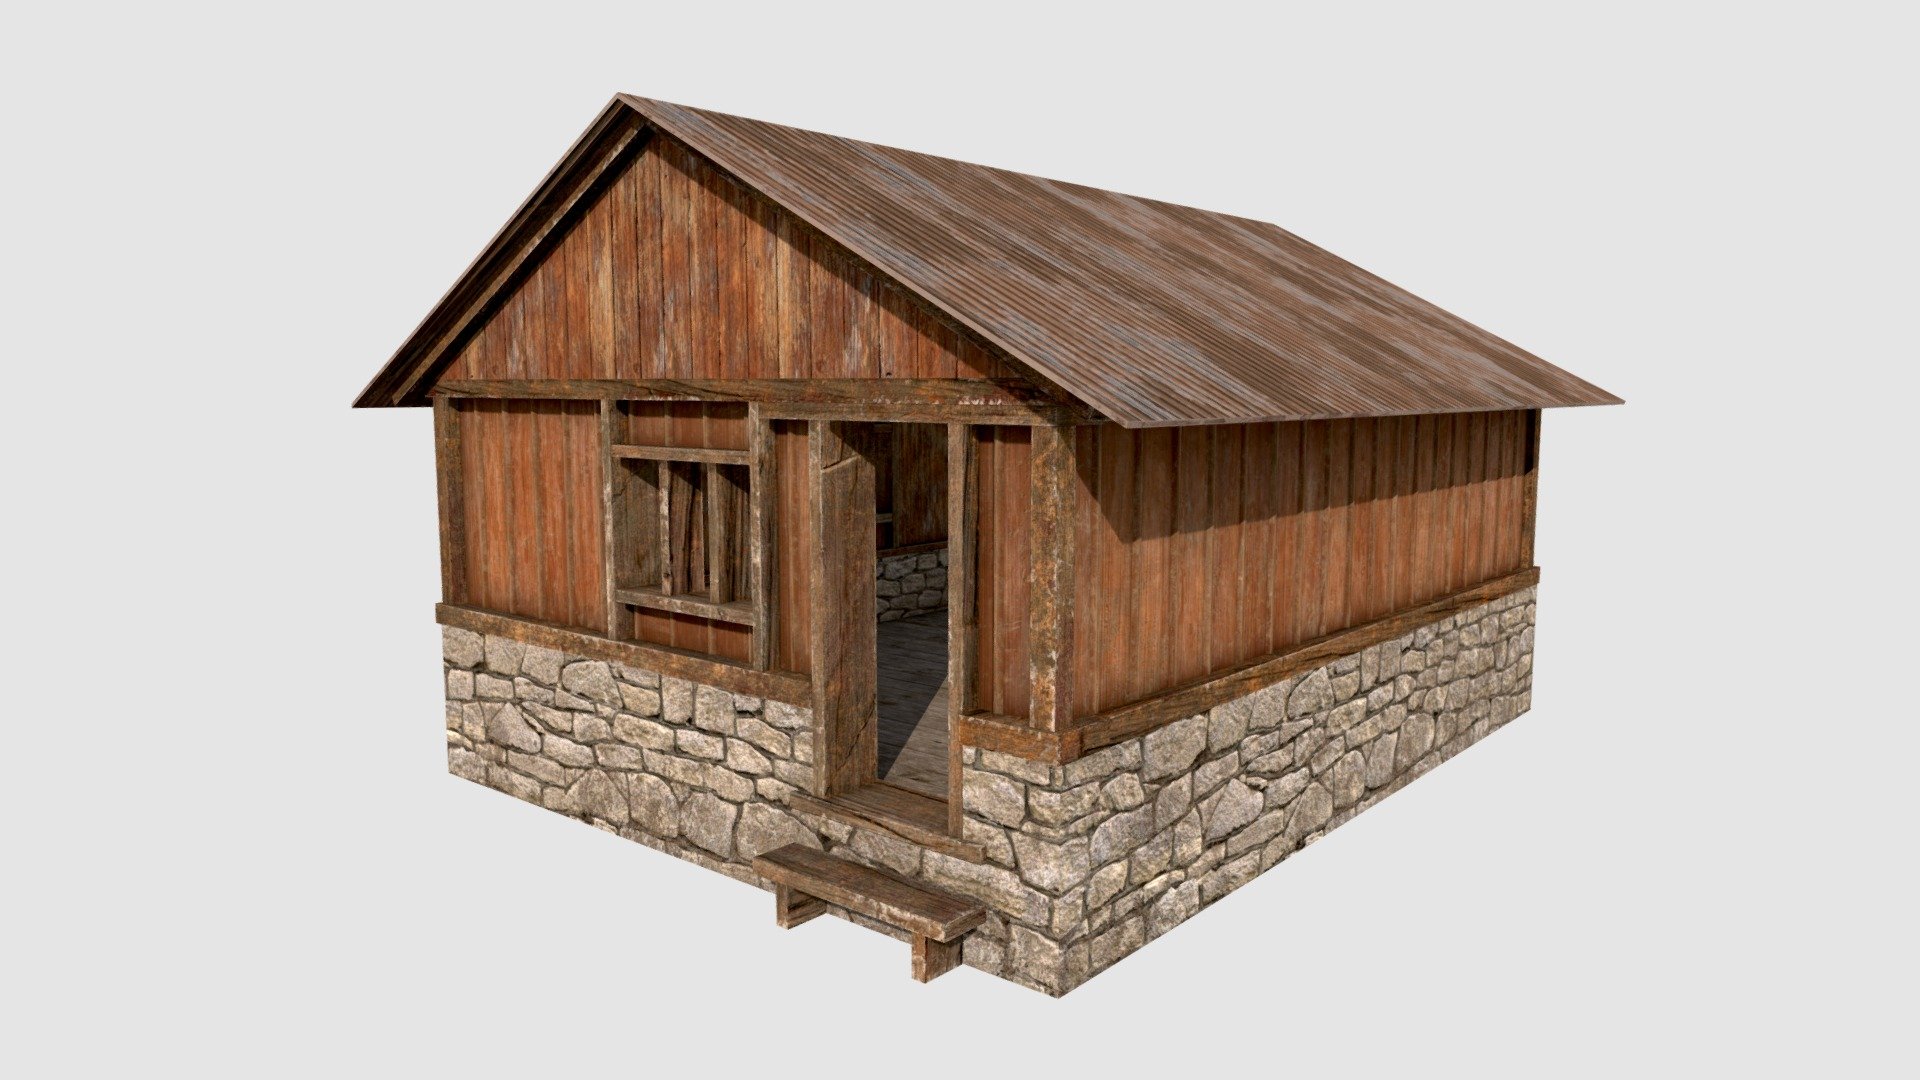 A small wooden hut with an enterable interior. Includes two materials and a separate door model which can be animated. Works great in any modern game engine or for rendering purposes. Available in: fbx, obj, blend, dae, gltf, Unreal project and Unity package.

Textures are in 4096x4096 resolution:




Diffuse/Base colour

Roughness

Metallic

Normal map

Ambient Occlusion

Unity and Unreal packages include drag and drop prefabs with packed textures.
Textures were created in, and exported from, Substance Painter.
Model created with, and native to, Blender 2.92 - Wooden Hut - Buy Royalty Free 3D model by HowardCoates 3d model